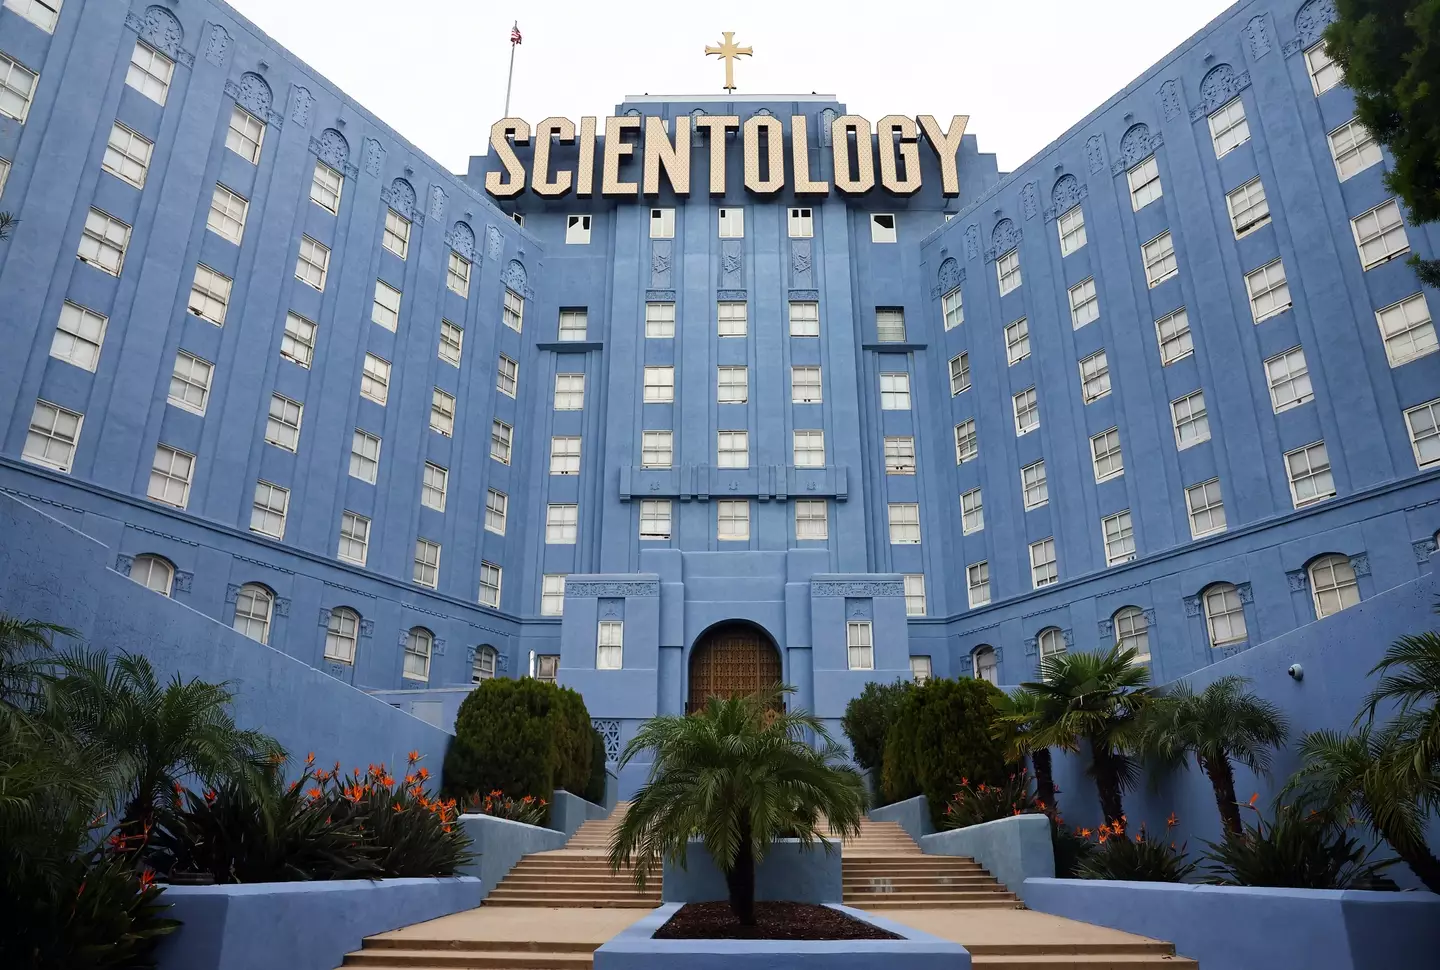 The Church of Scientology building in Los Angeles.